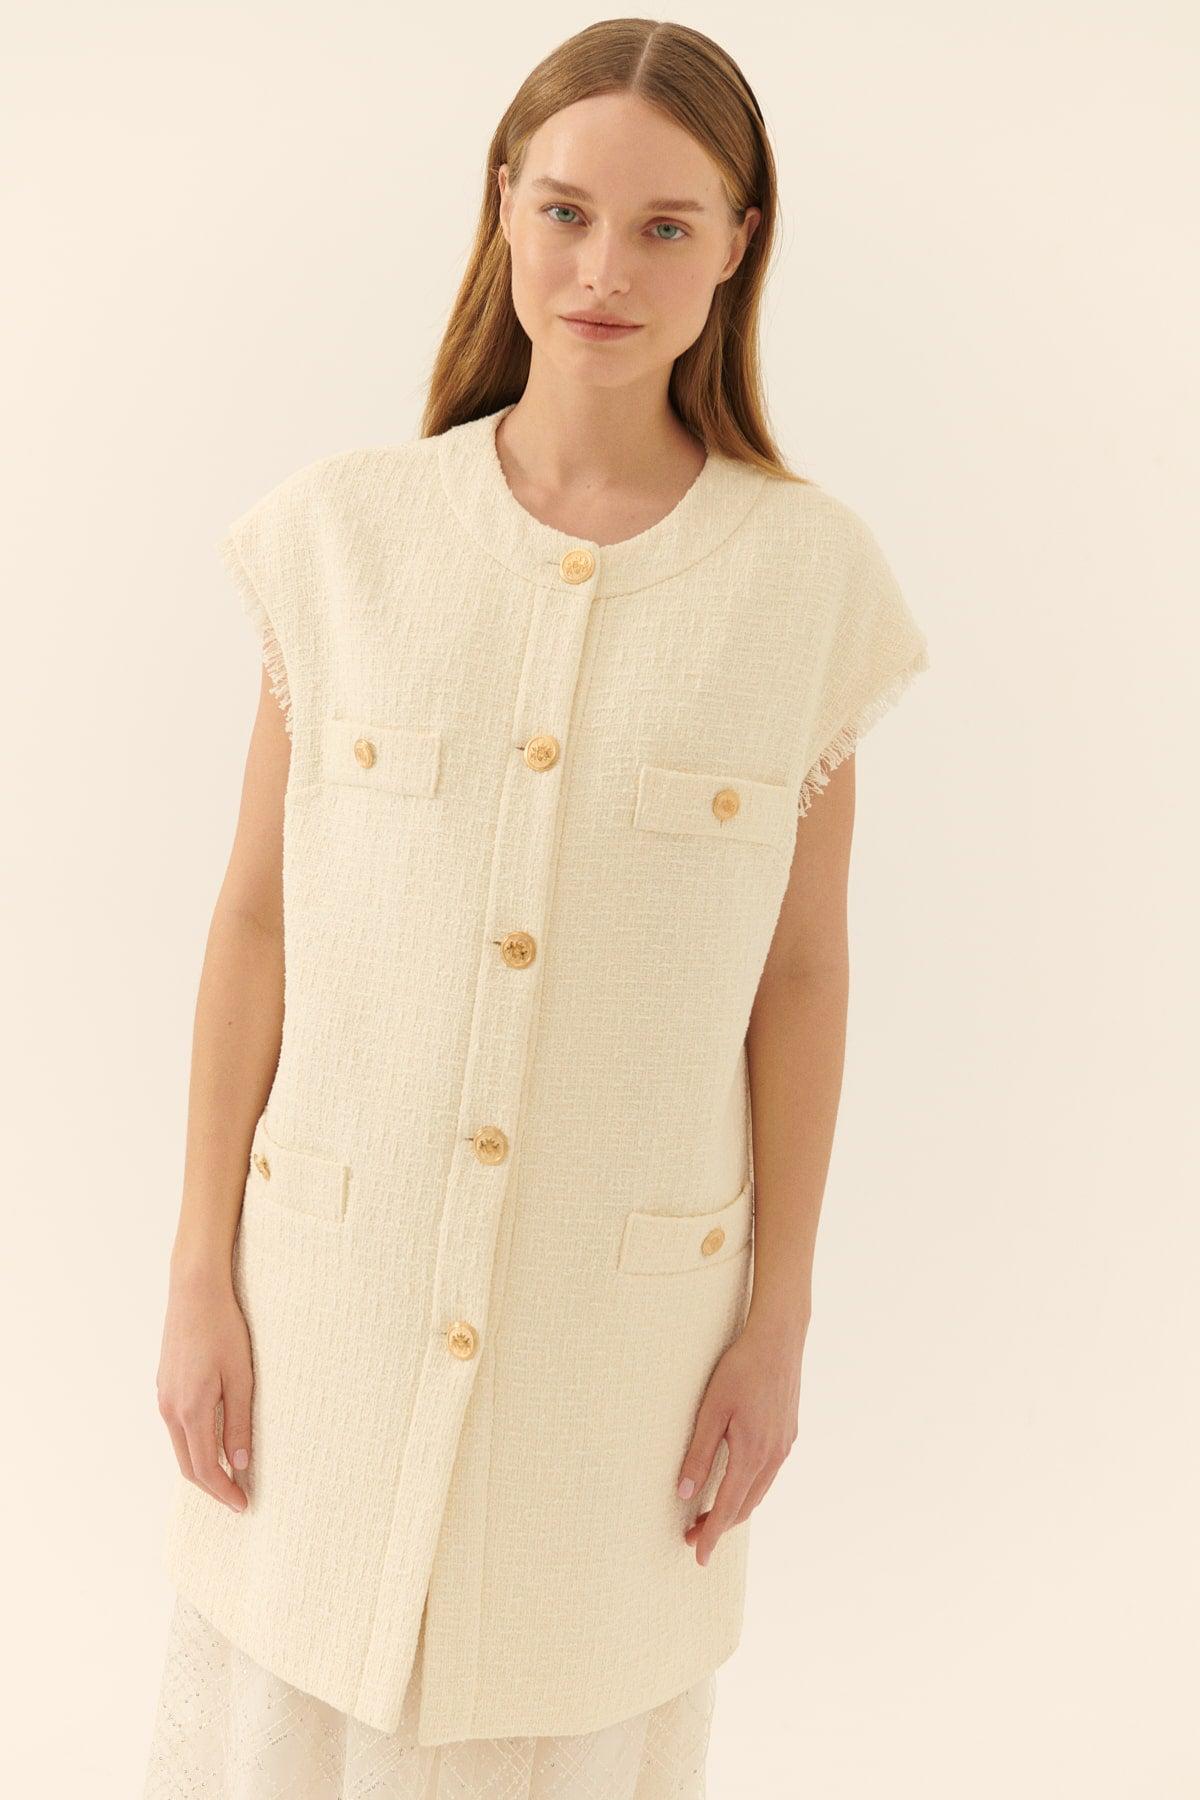 Gold Buttoned Tweed Vest